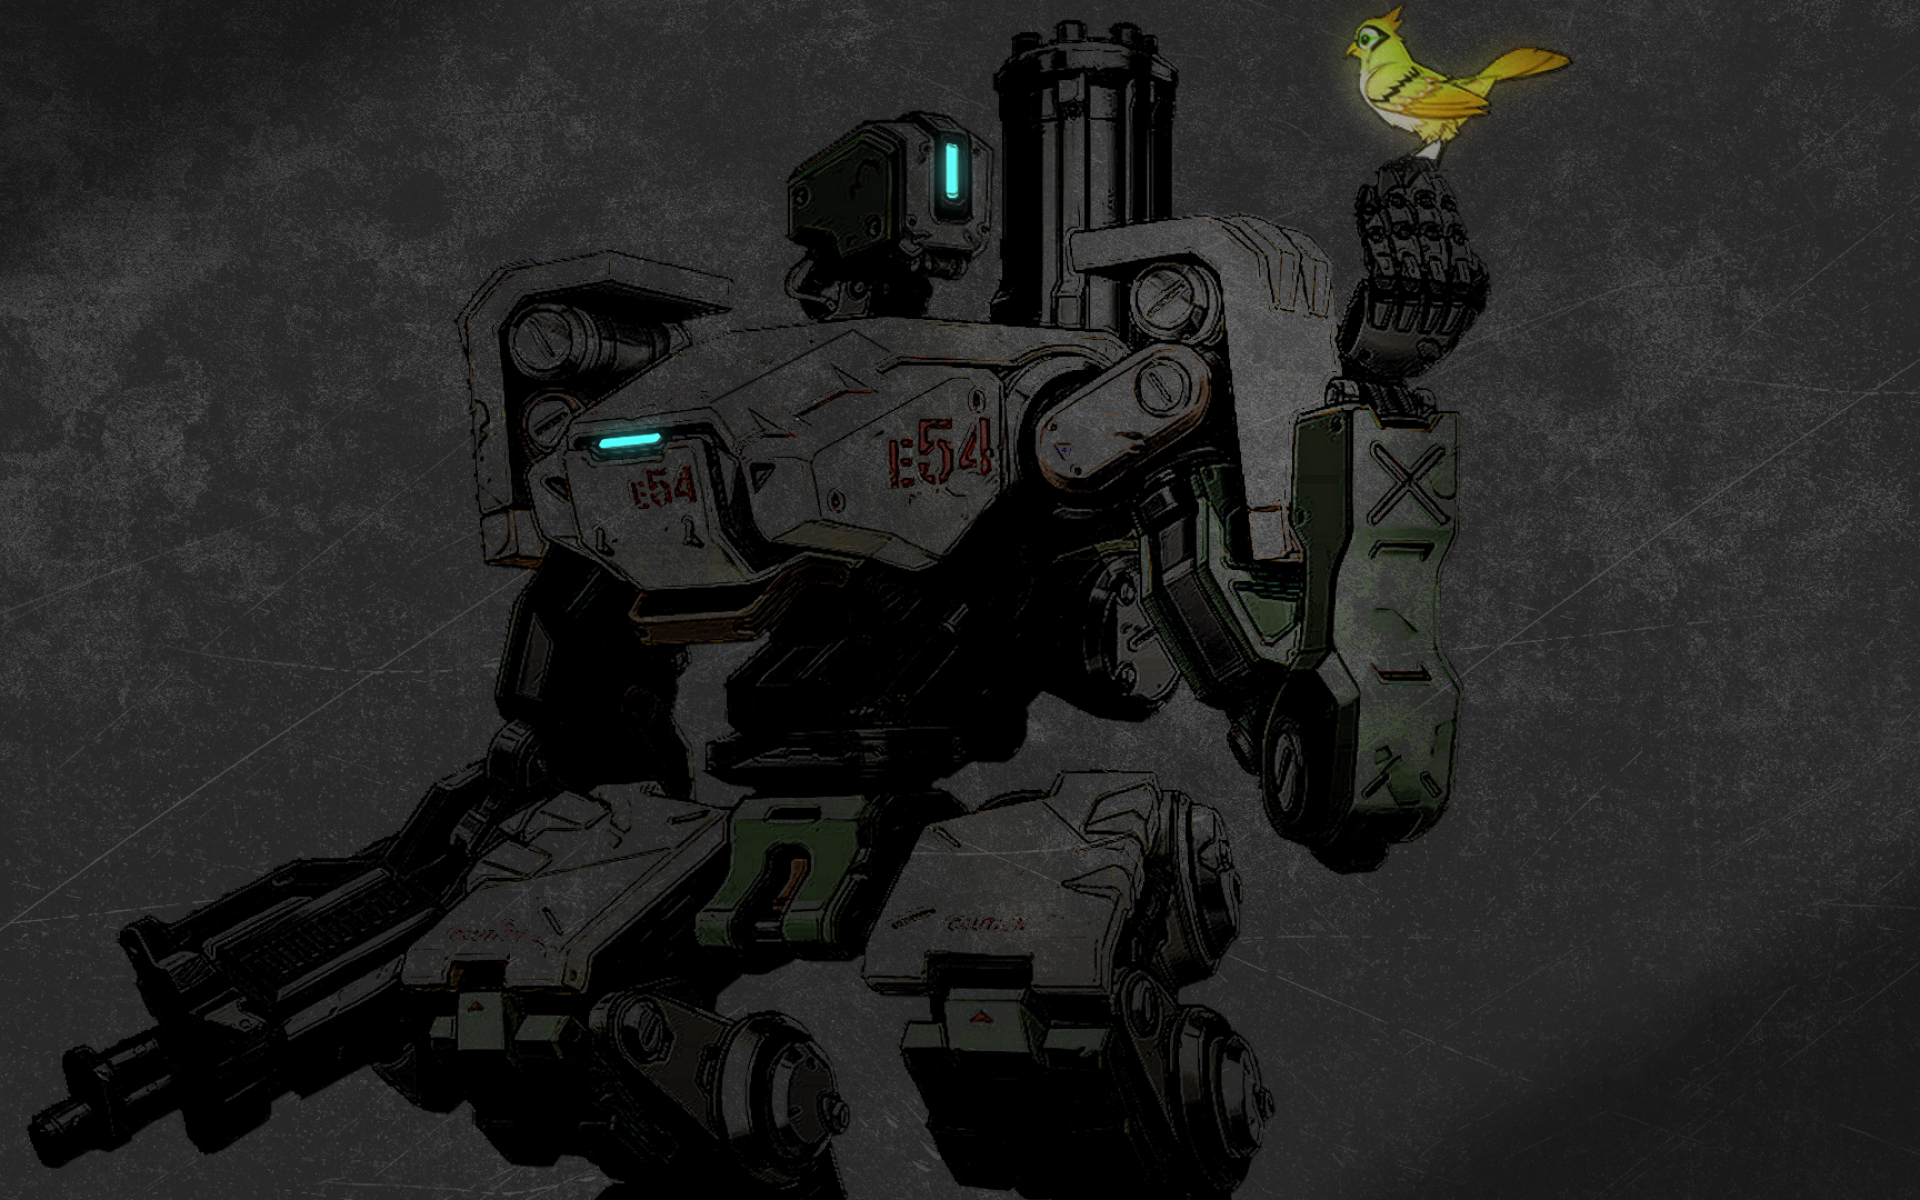 Bastion the friendly robot